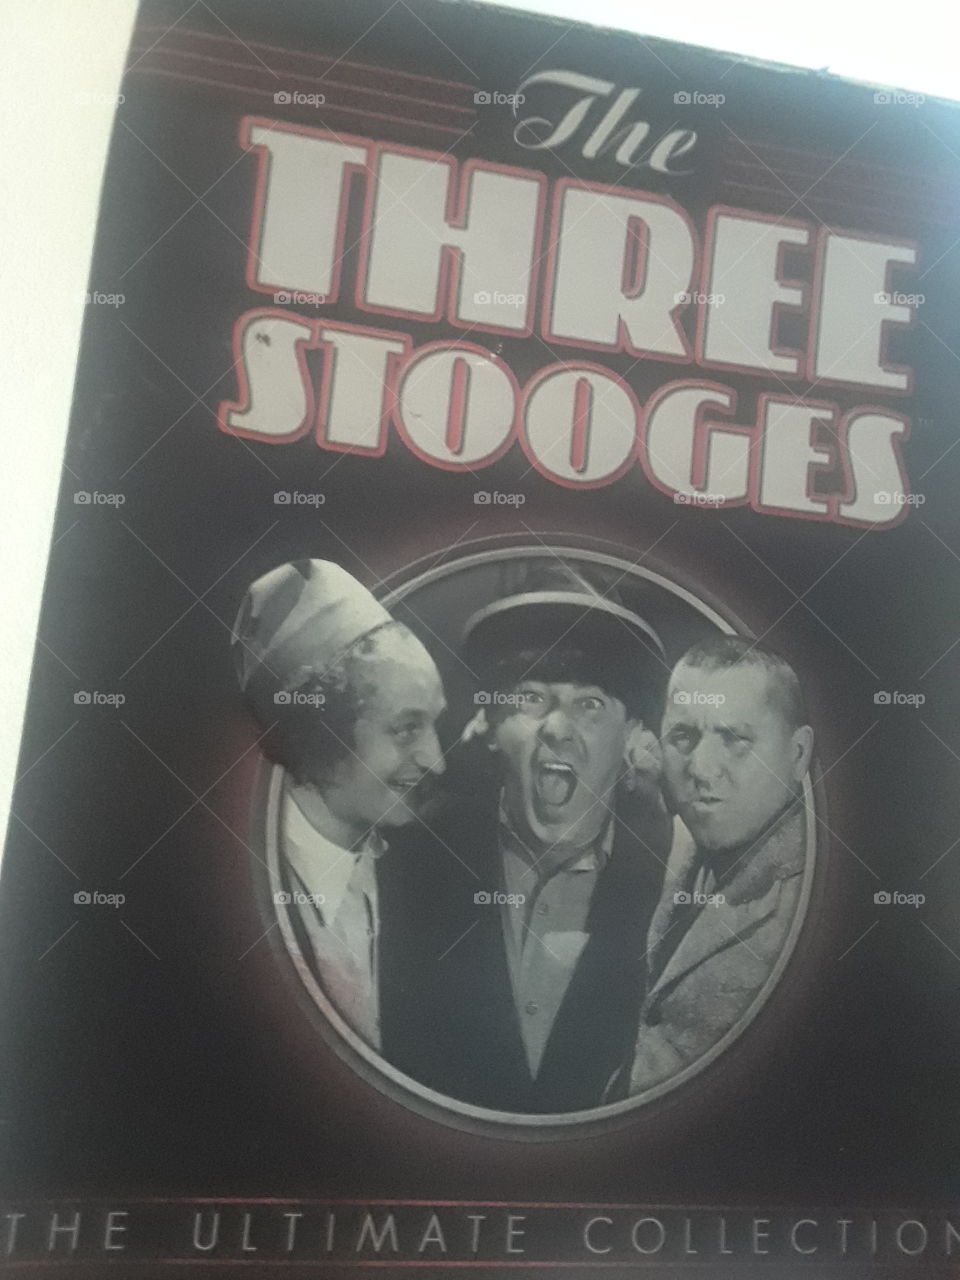 laughing time.3 stooges.Slap stick comedy.Funniest 3 men u ever seen.Goofy and wonderful humor.It will make u laugh and smile.Stooge life.